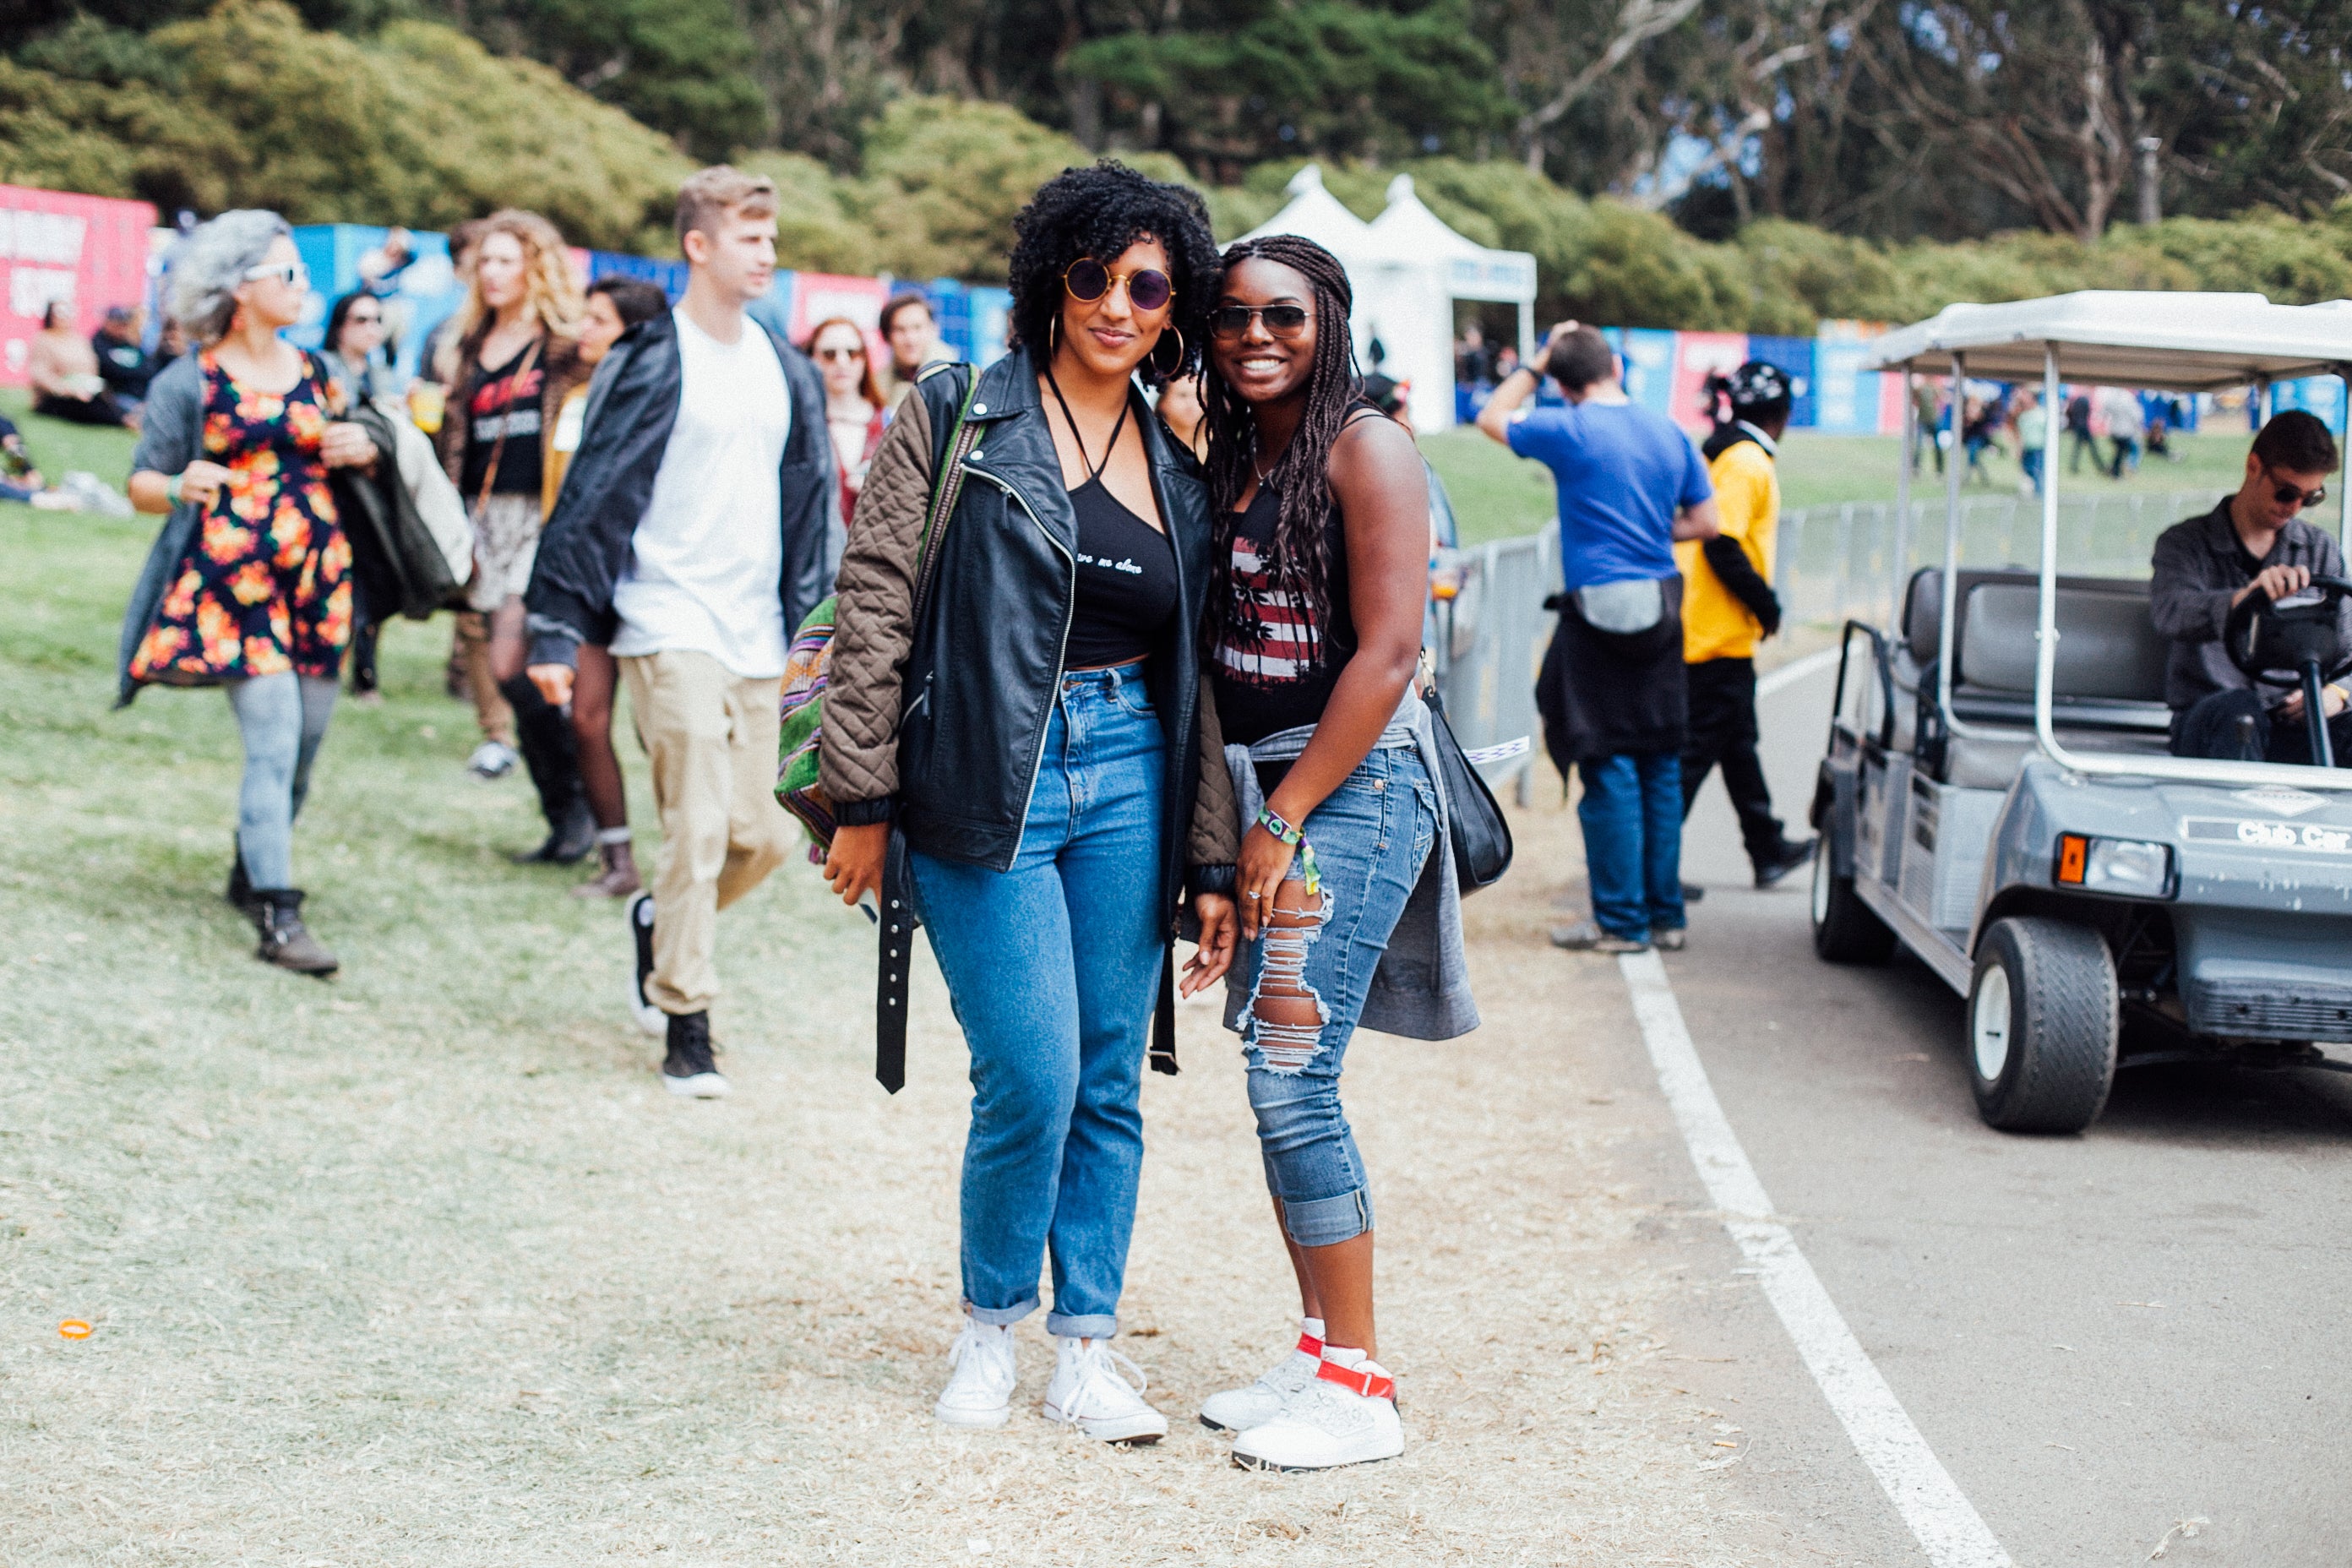 All The Coolest Looks From Outside Lands Music and Arts Festival
